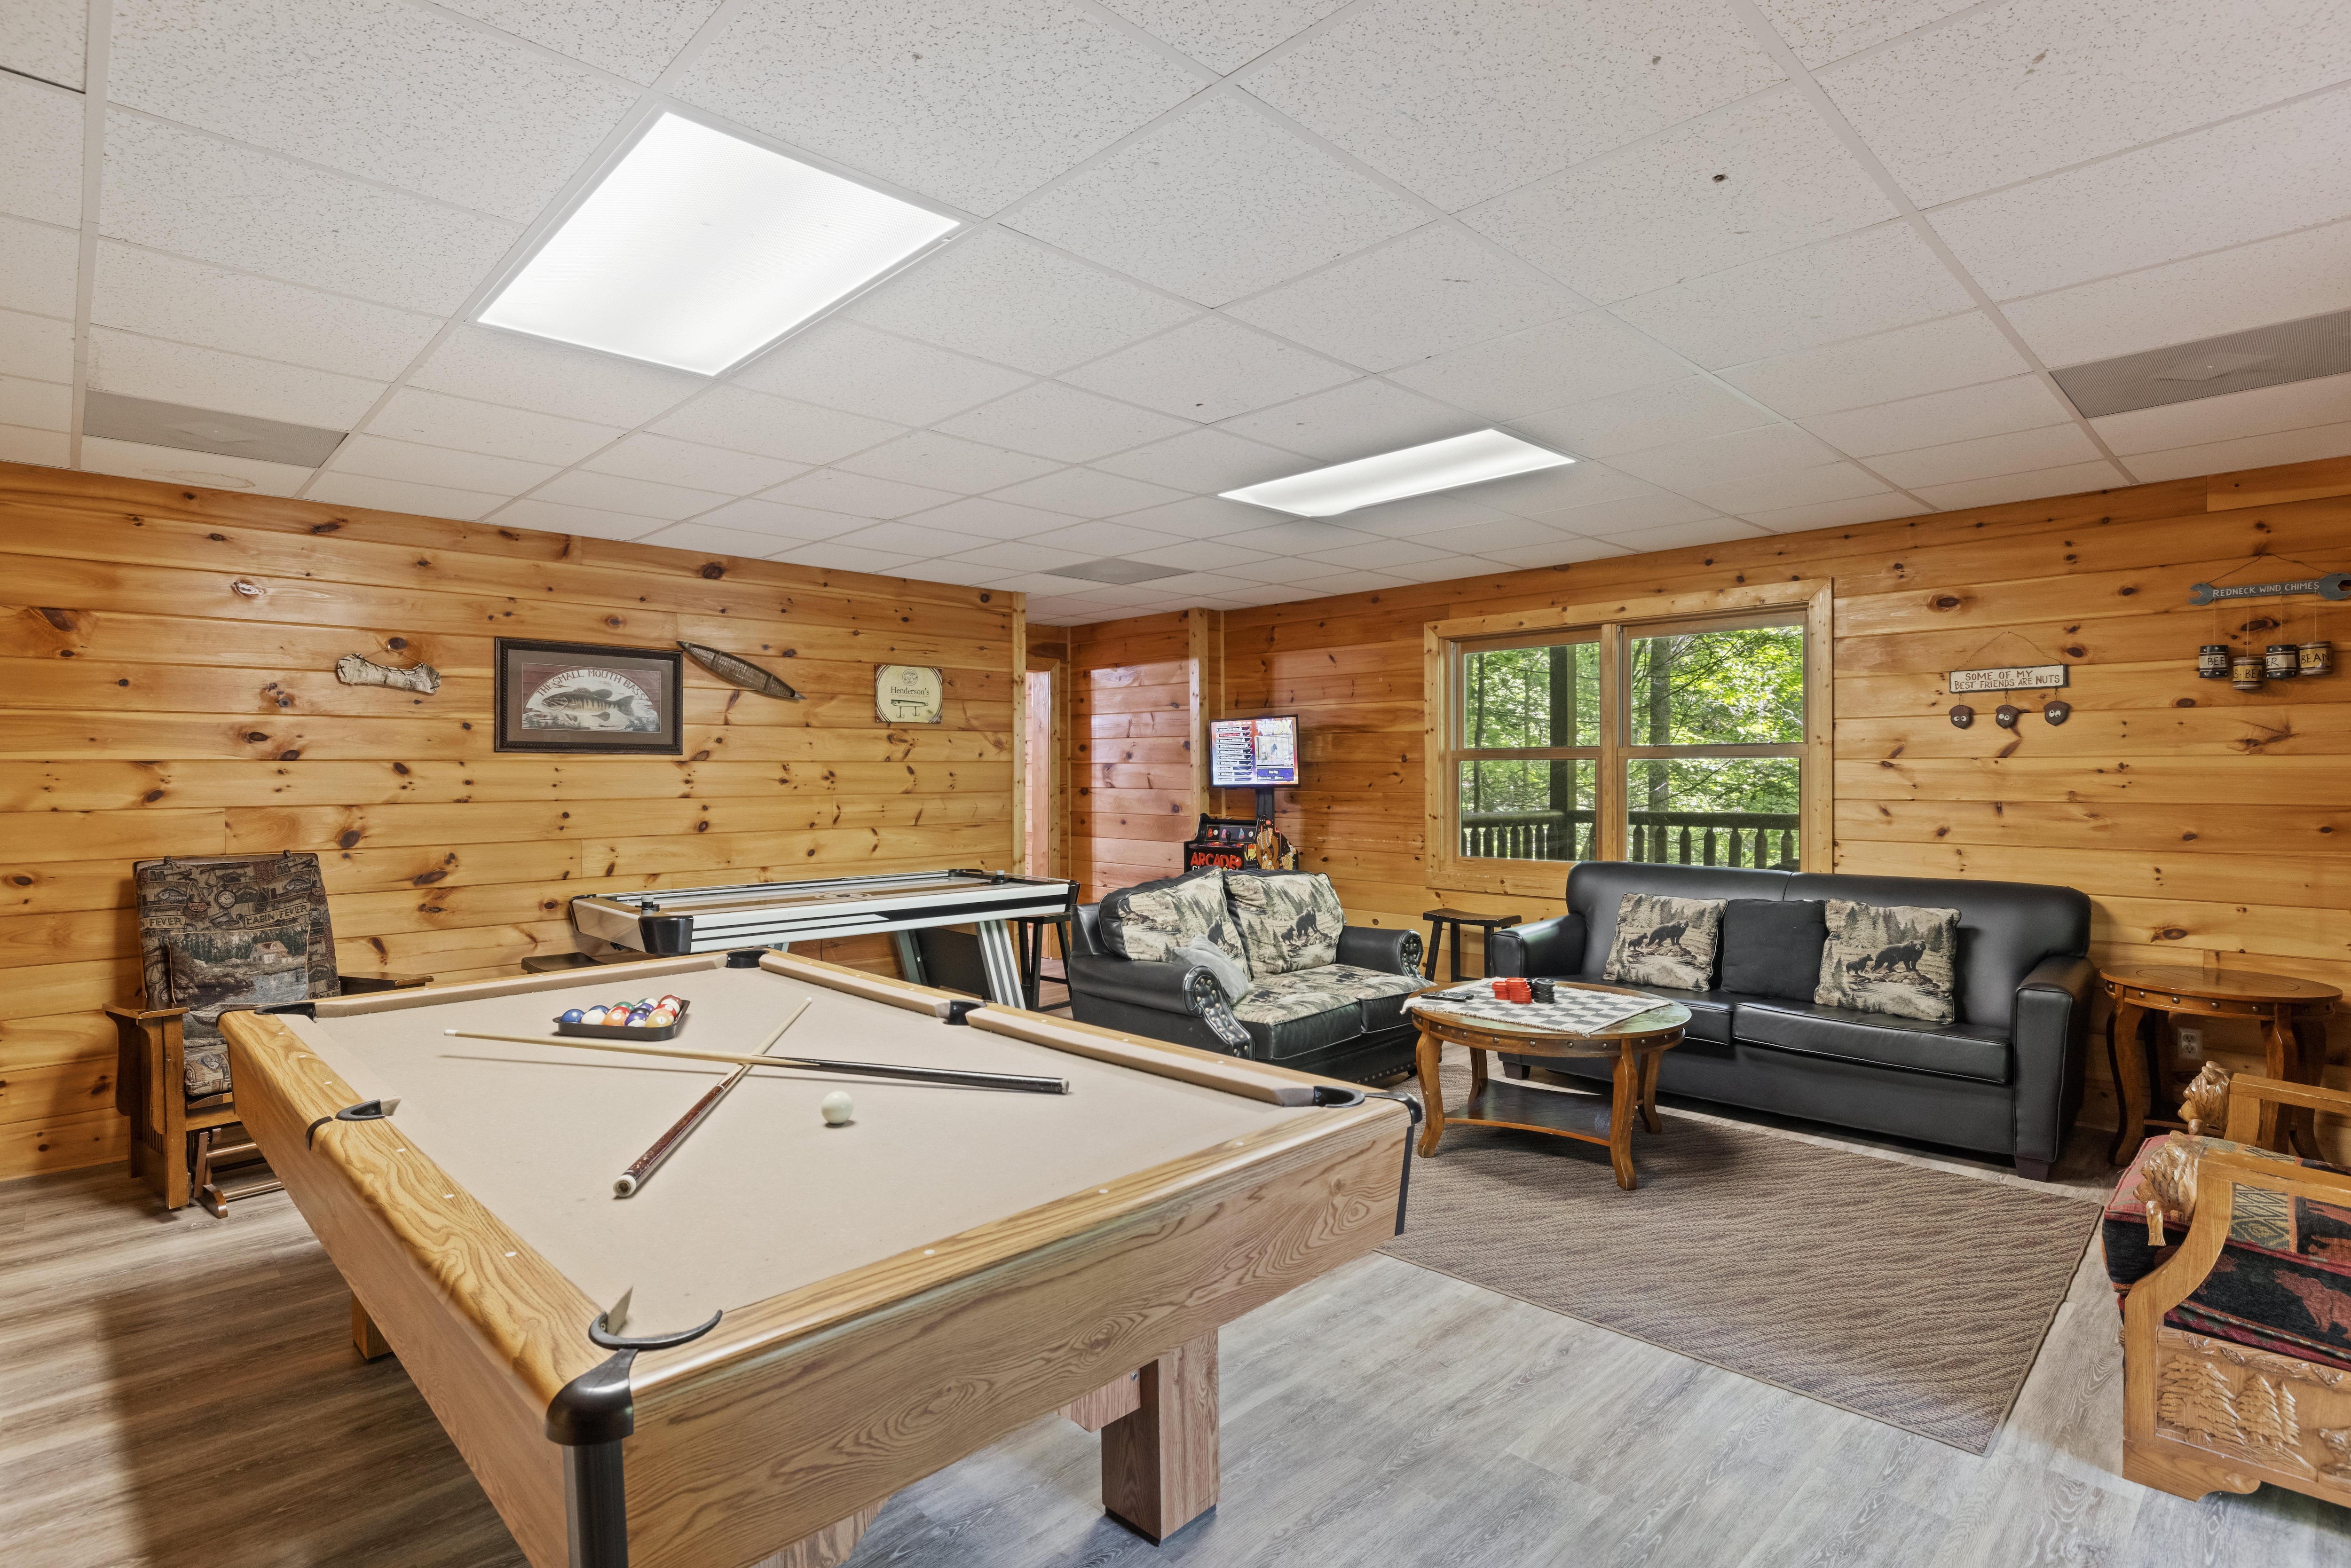 Enjoy your amazing multi-game billiards room with air hockey and 100+ video arcade system!